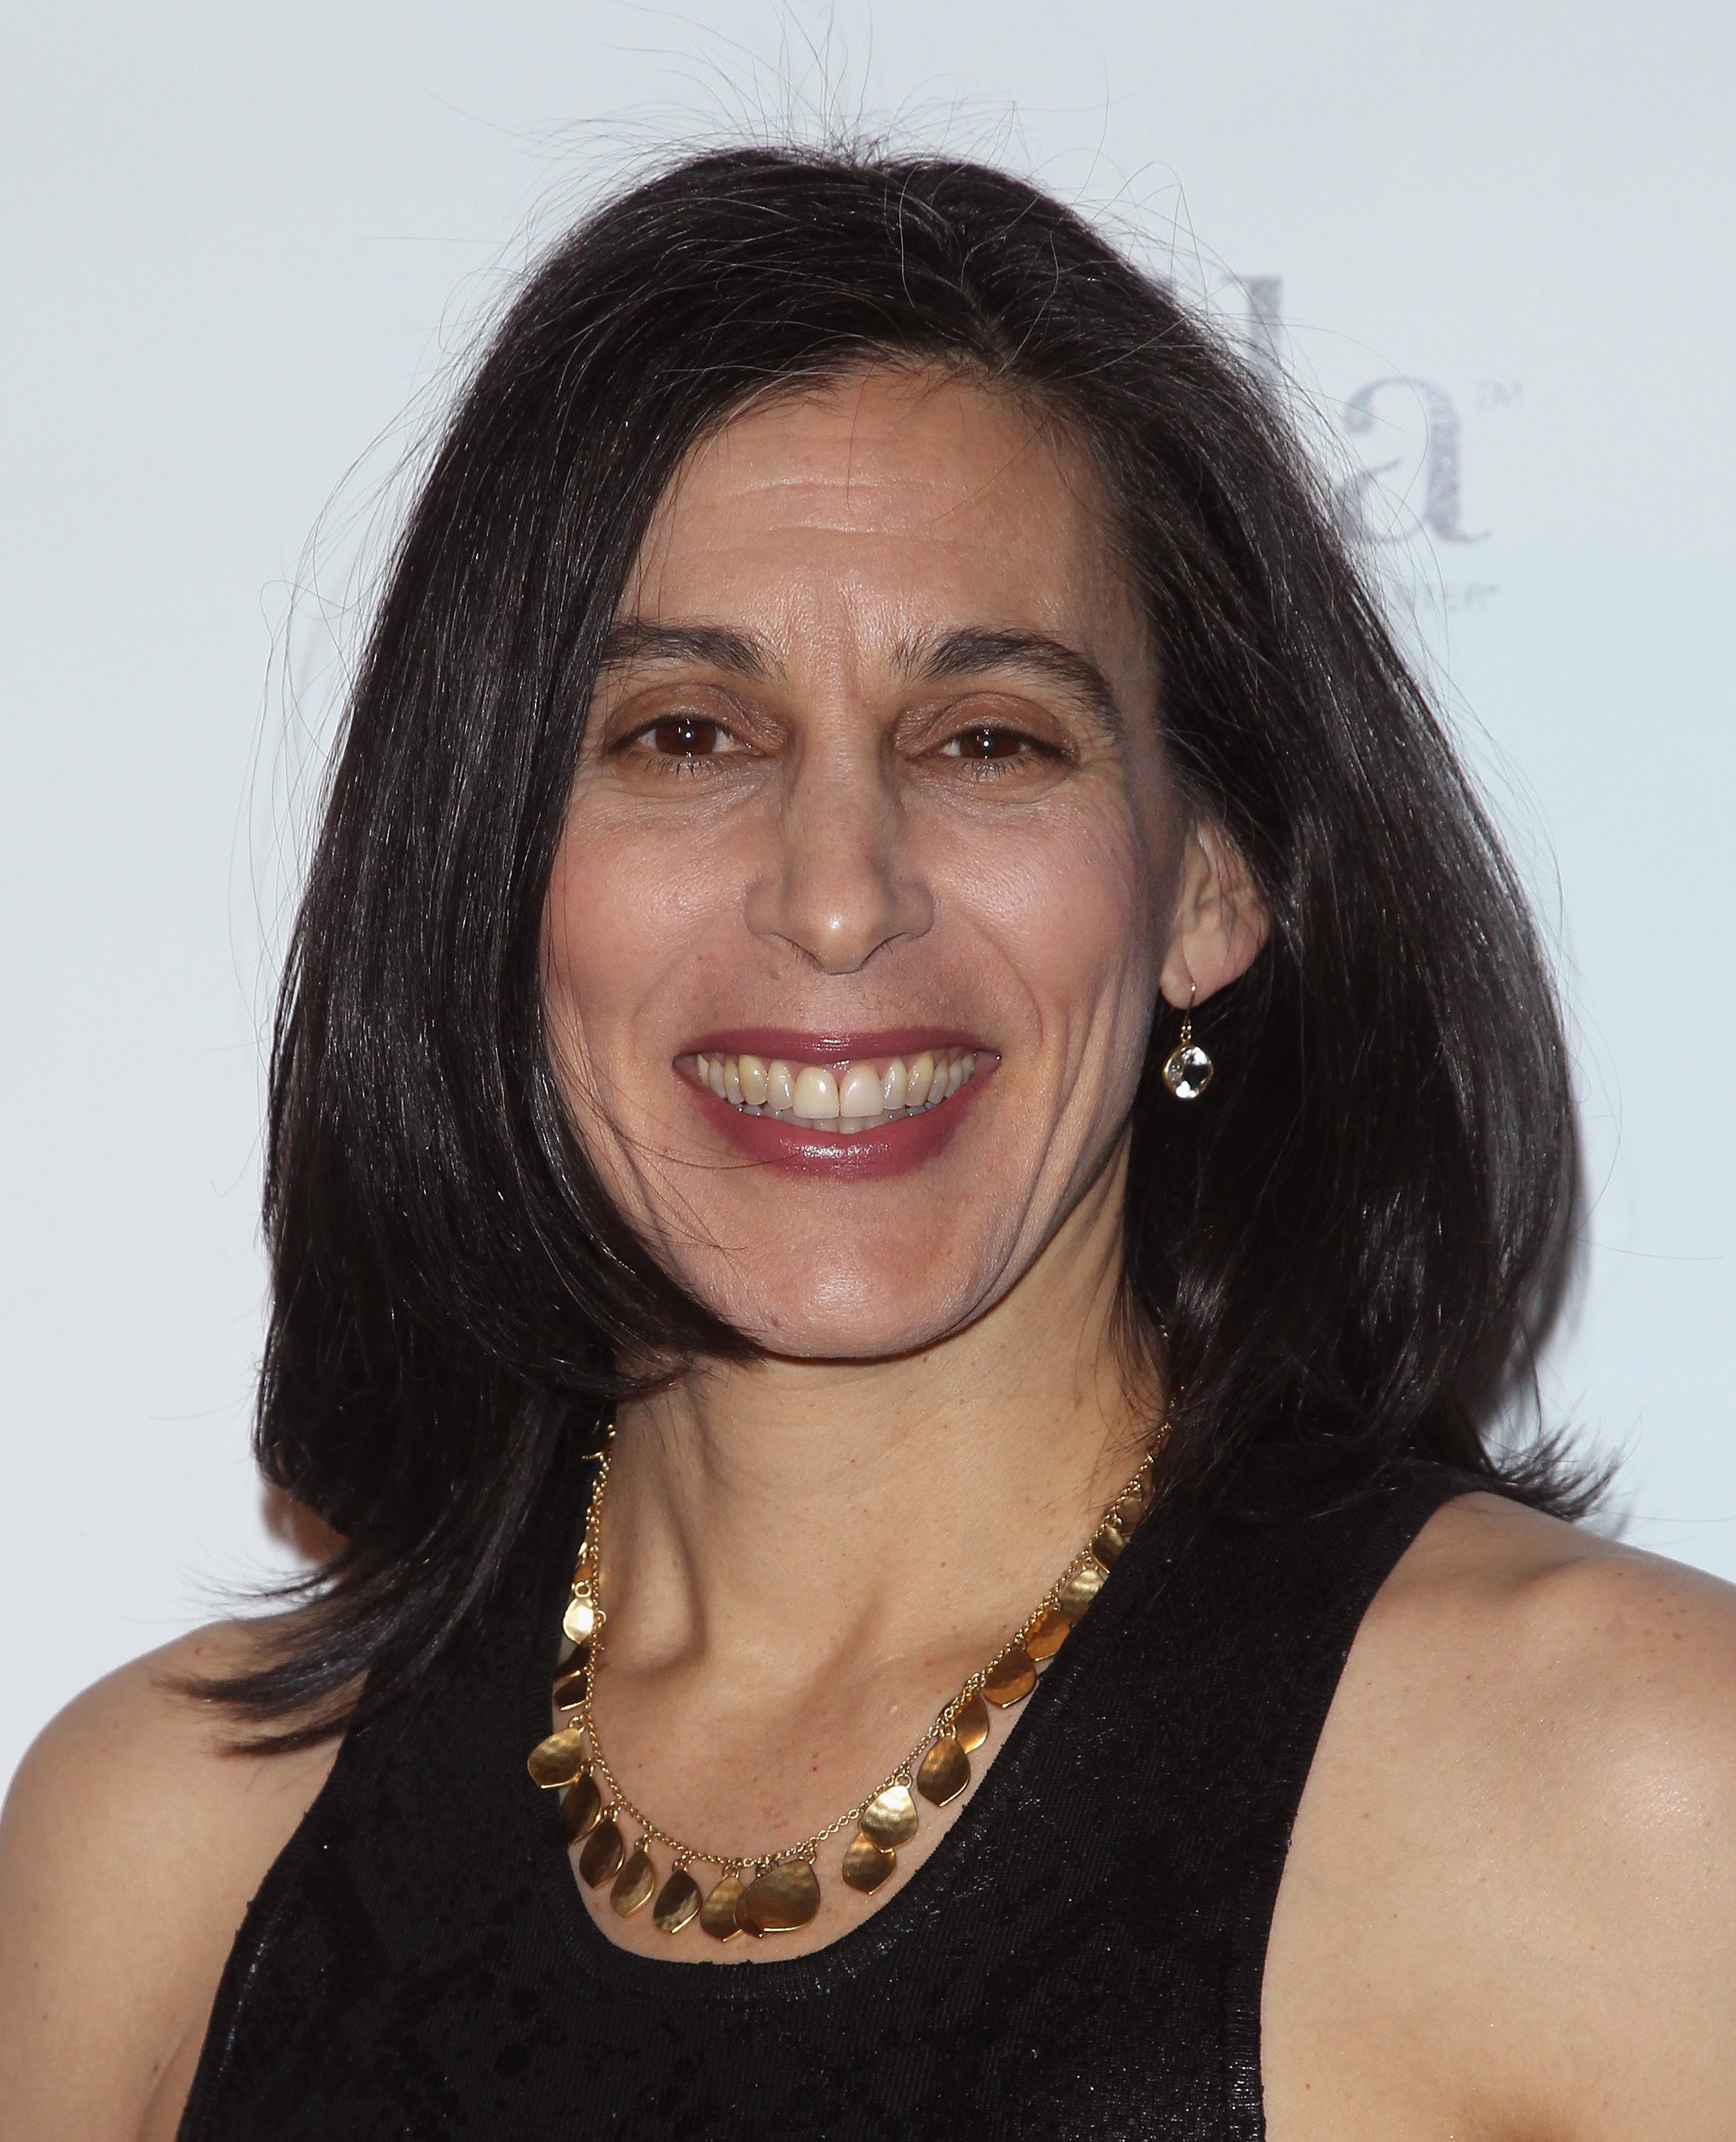 Beatrice Alda at the 2014 "CMEE In The City" fundraiser at Riverpark, 2014, New York City. | Source: Getty Images